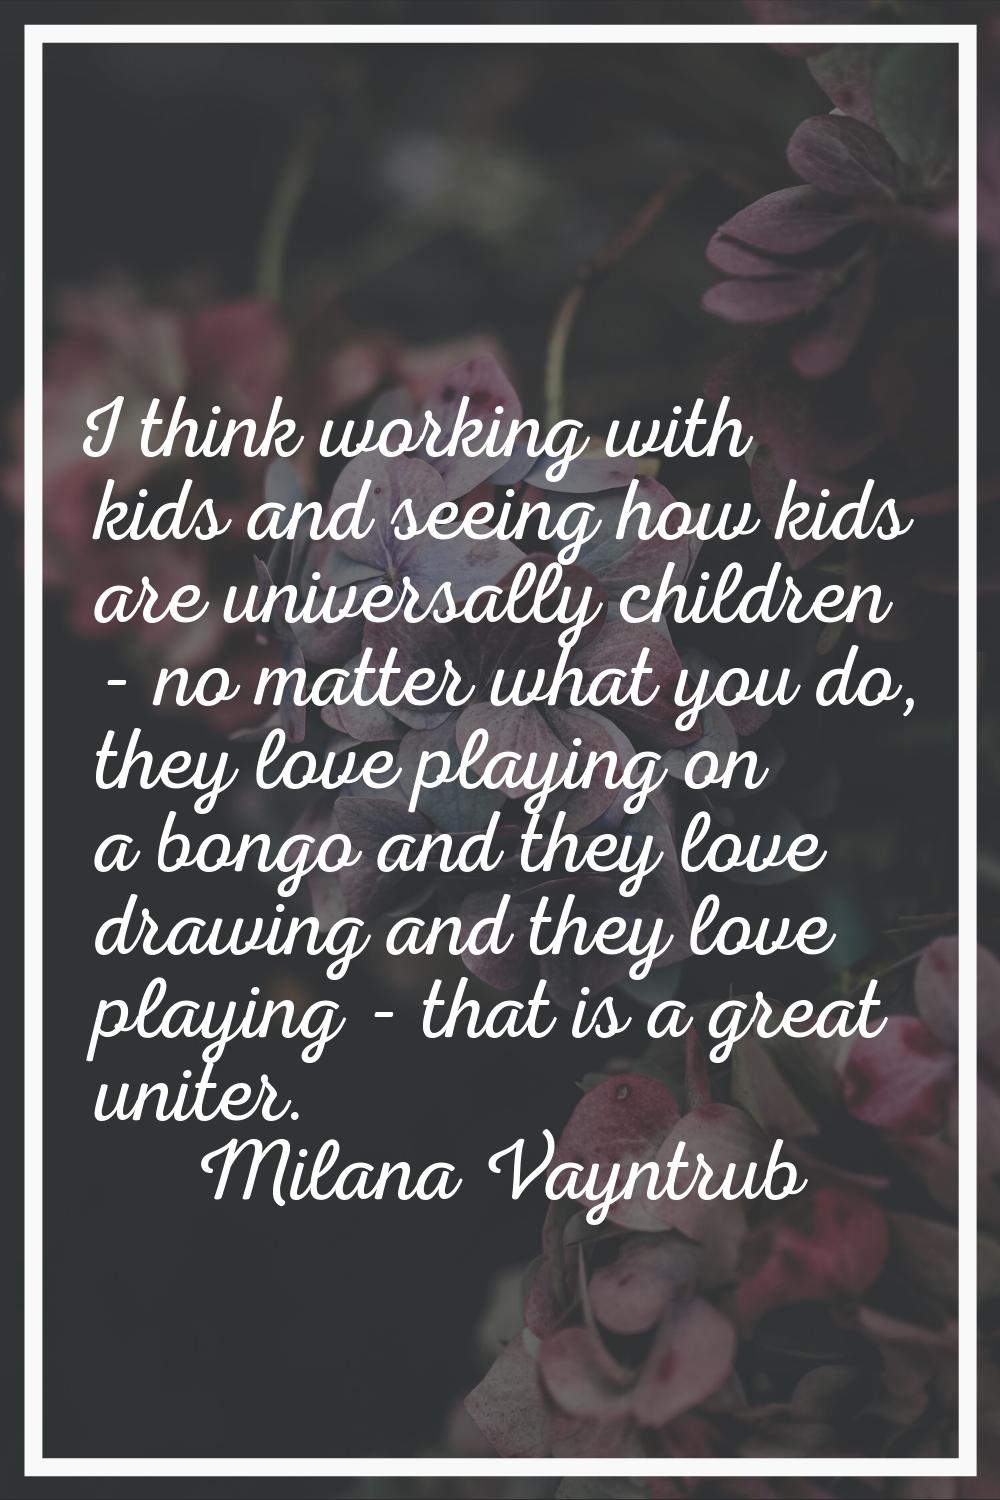 I think working with kids and seeing how kids are universally children - no matter what you do, the